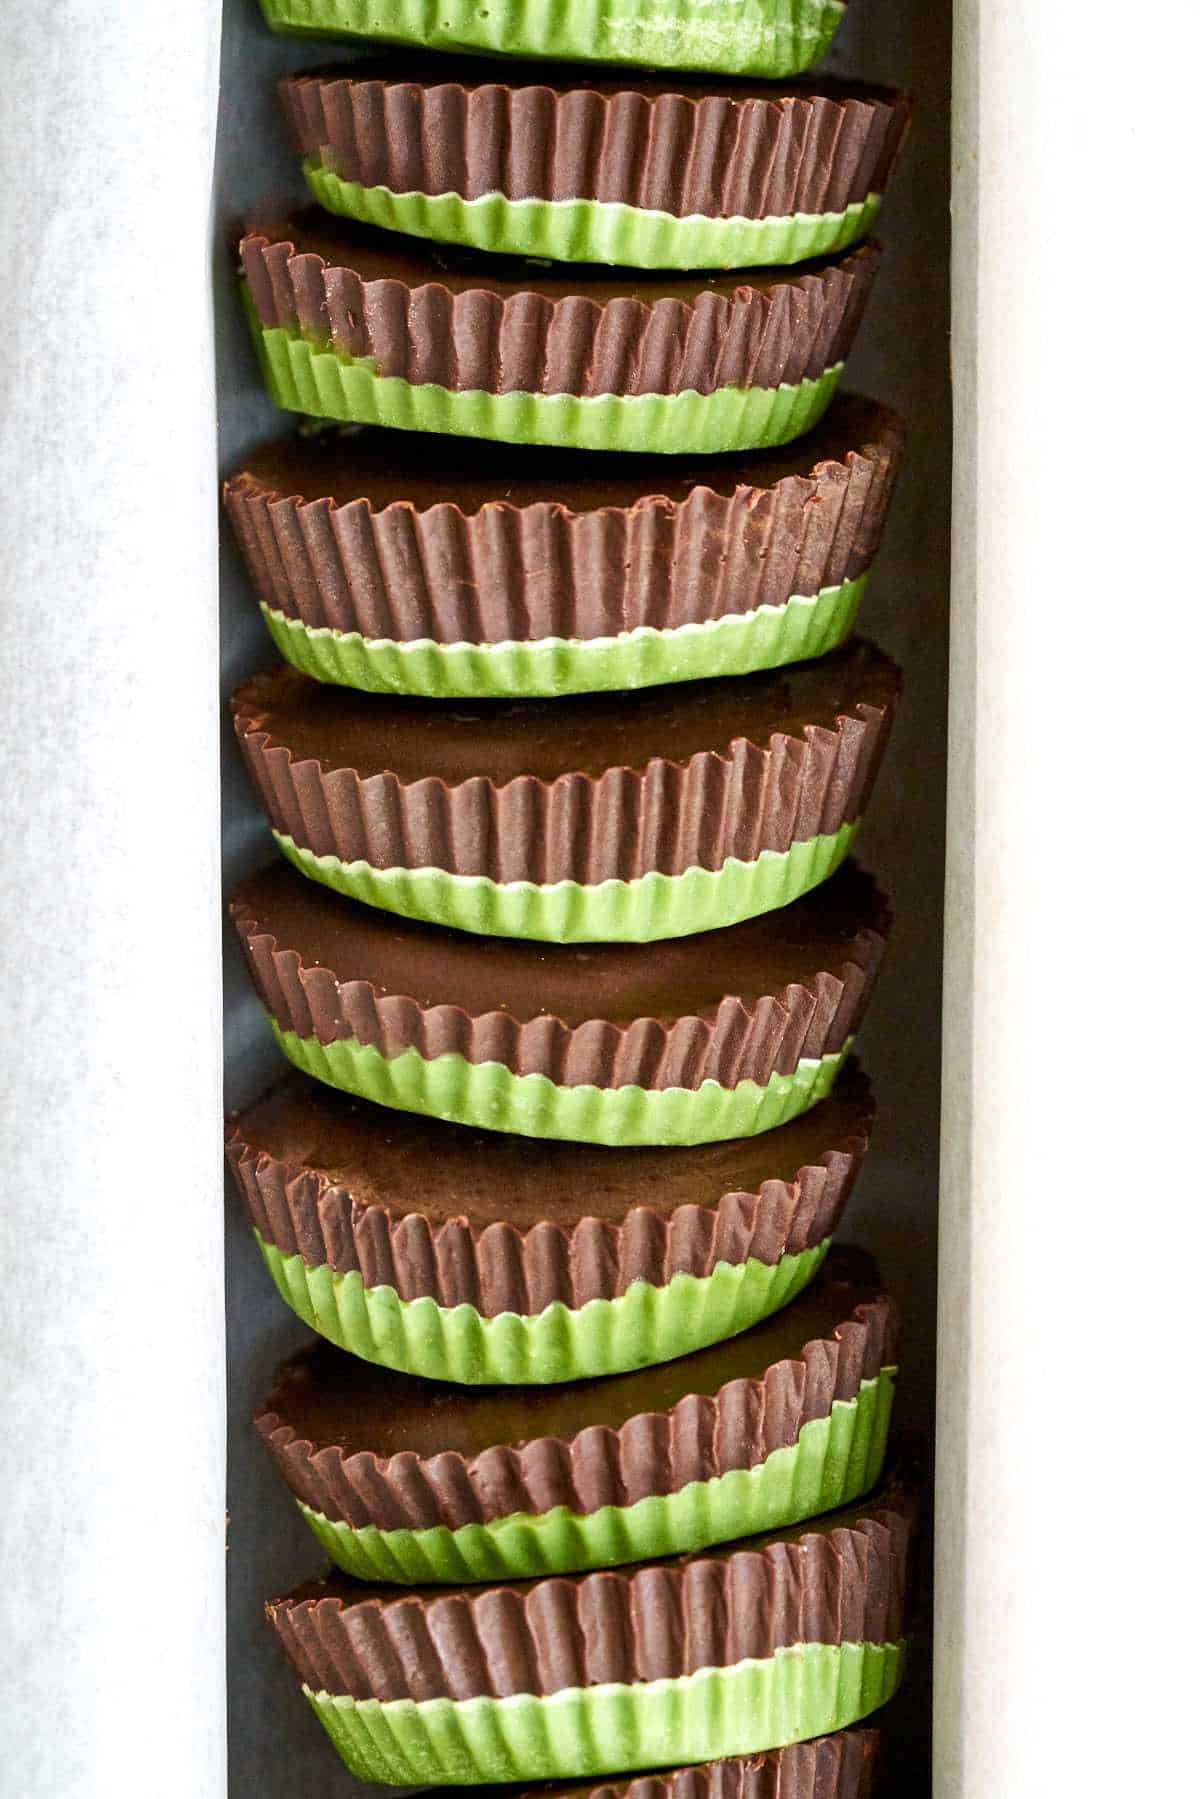 Stack of peanut butter cups that have green bottoms and chocolate tops.